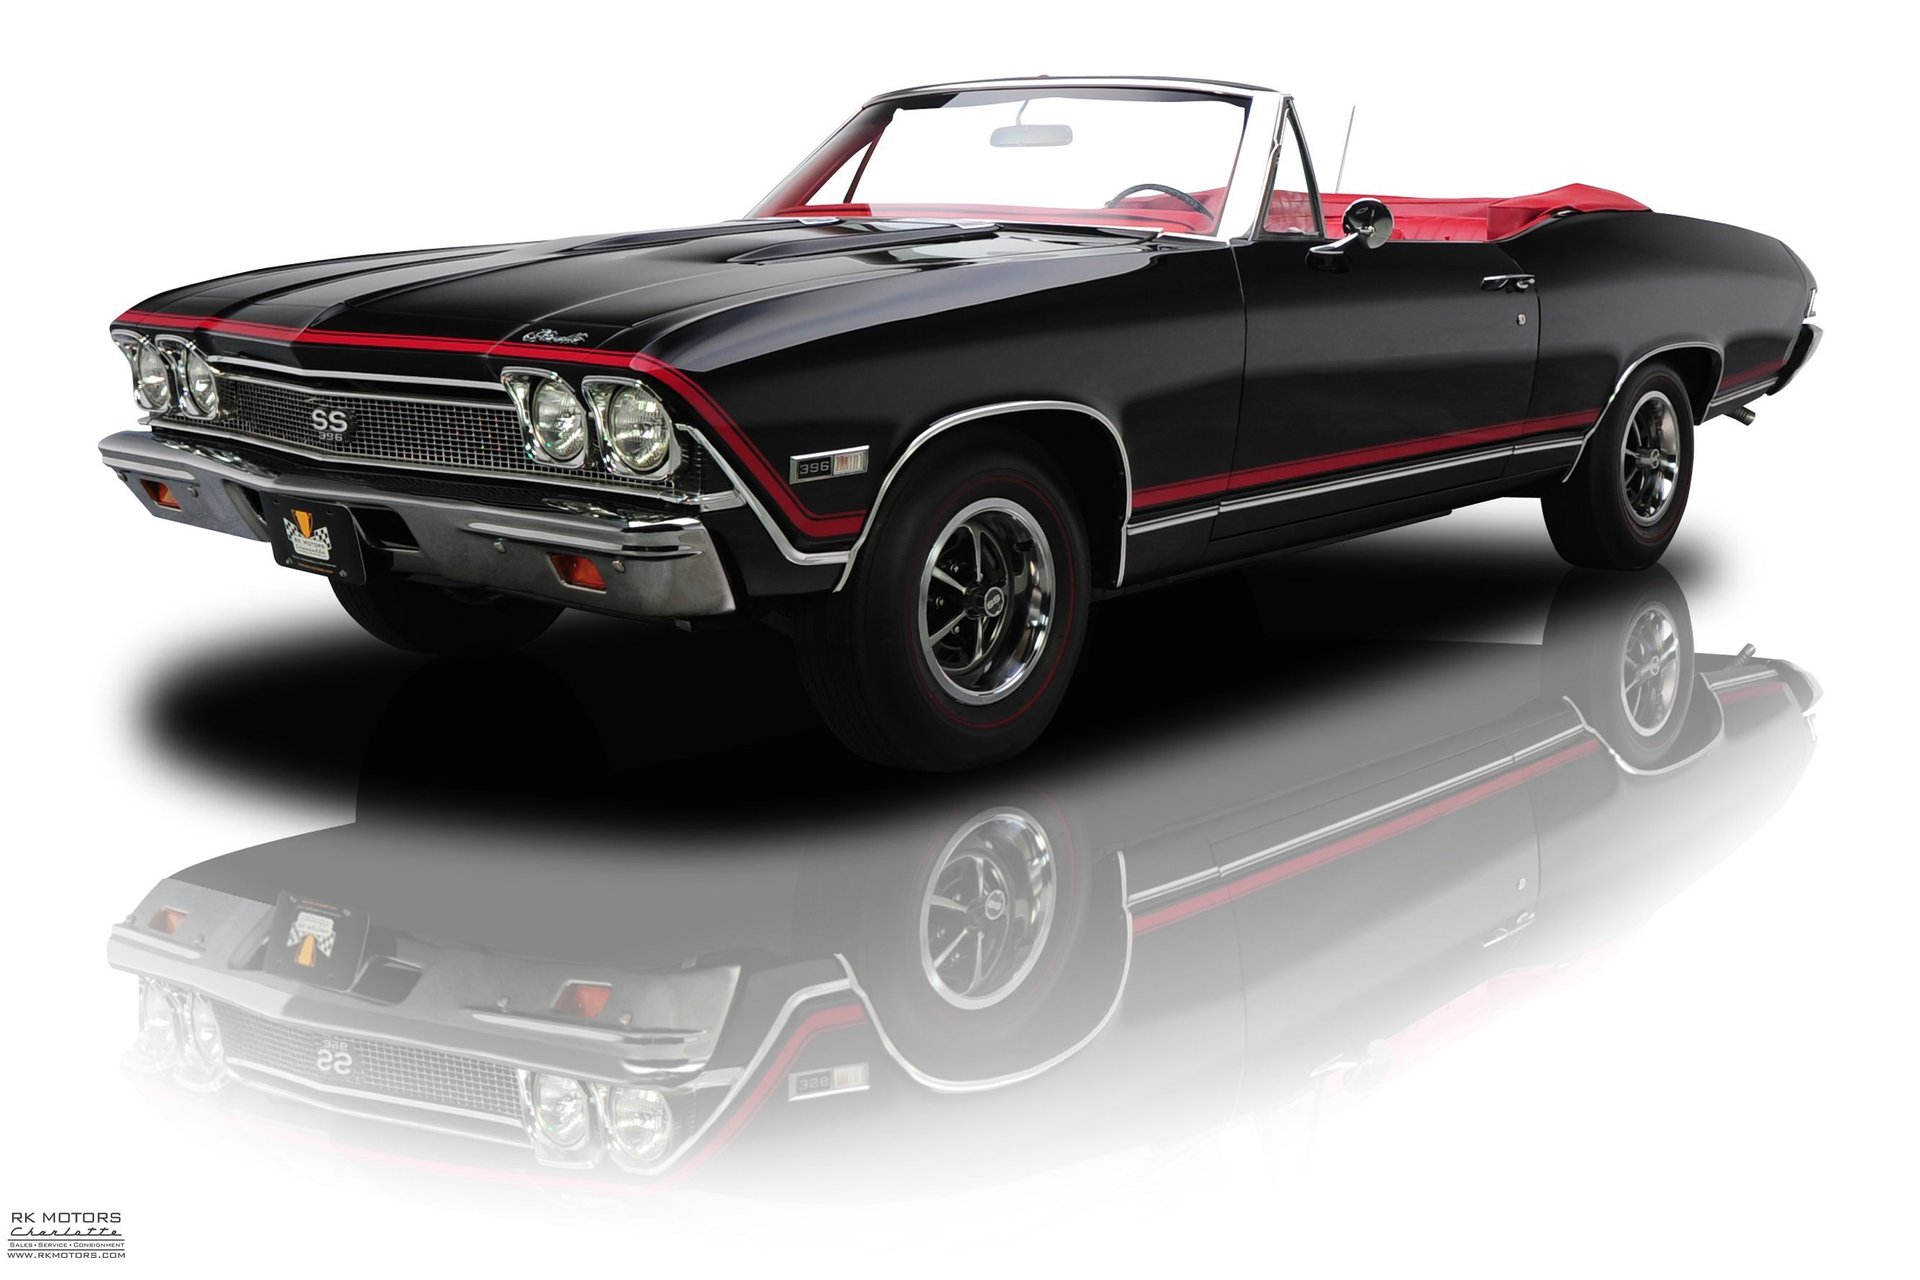 1968 Chevrolet Chevelle Rk Motors Classic Cars And Muscle Cars For Sale